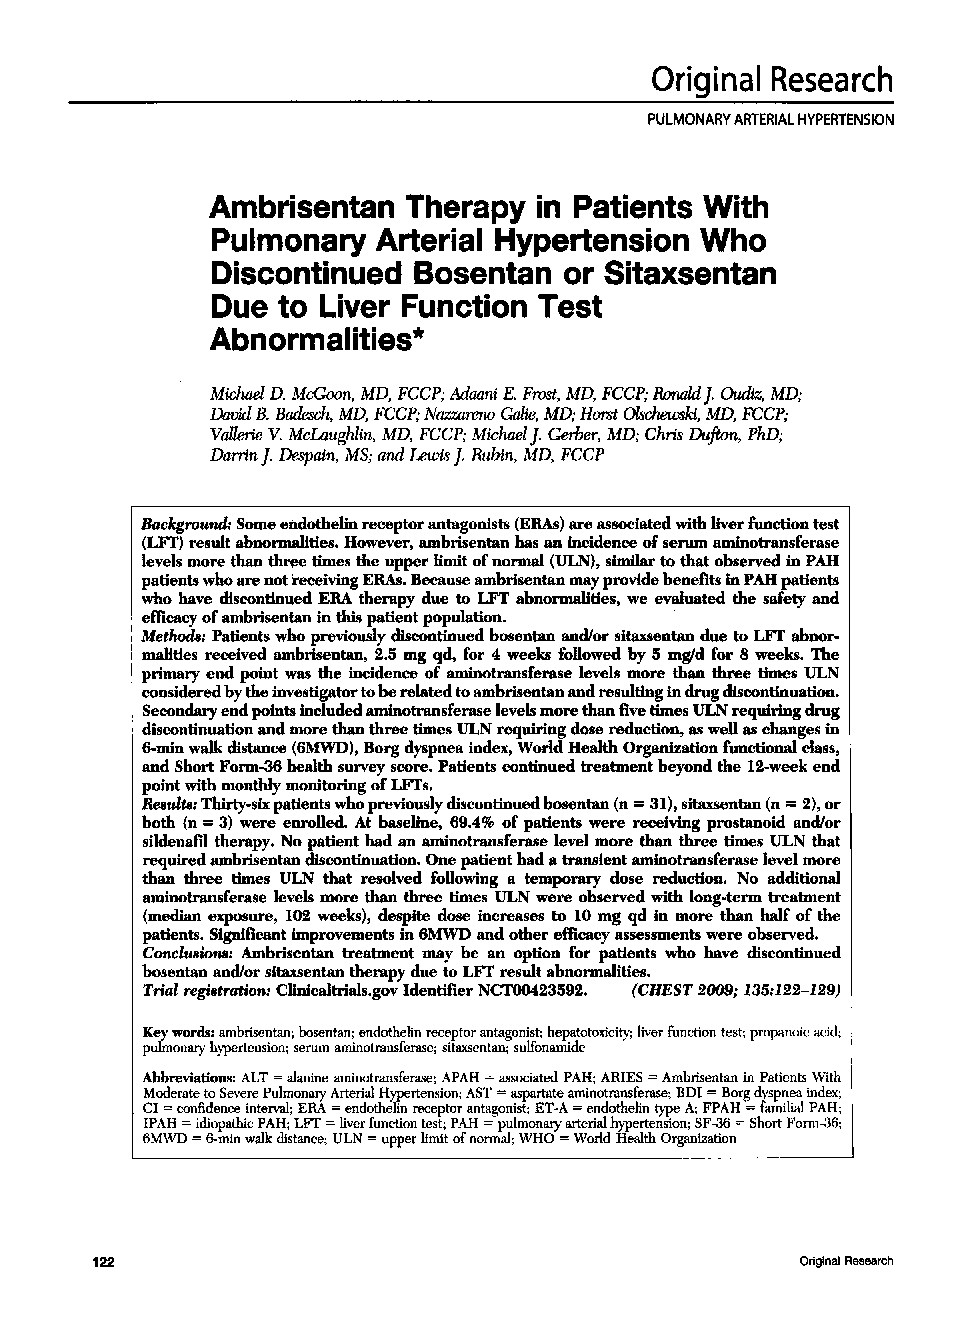 Ambrisentan Therapy in Patients With Pulmonary Arterial Hypertension Who Discontinued Bosentan or Sitaxsentan Due to Liver Function Test Abnormalities 